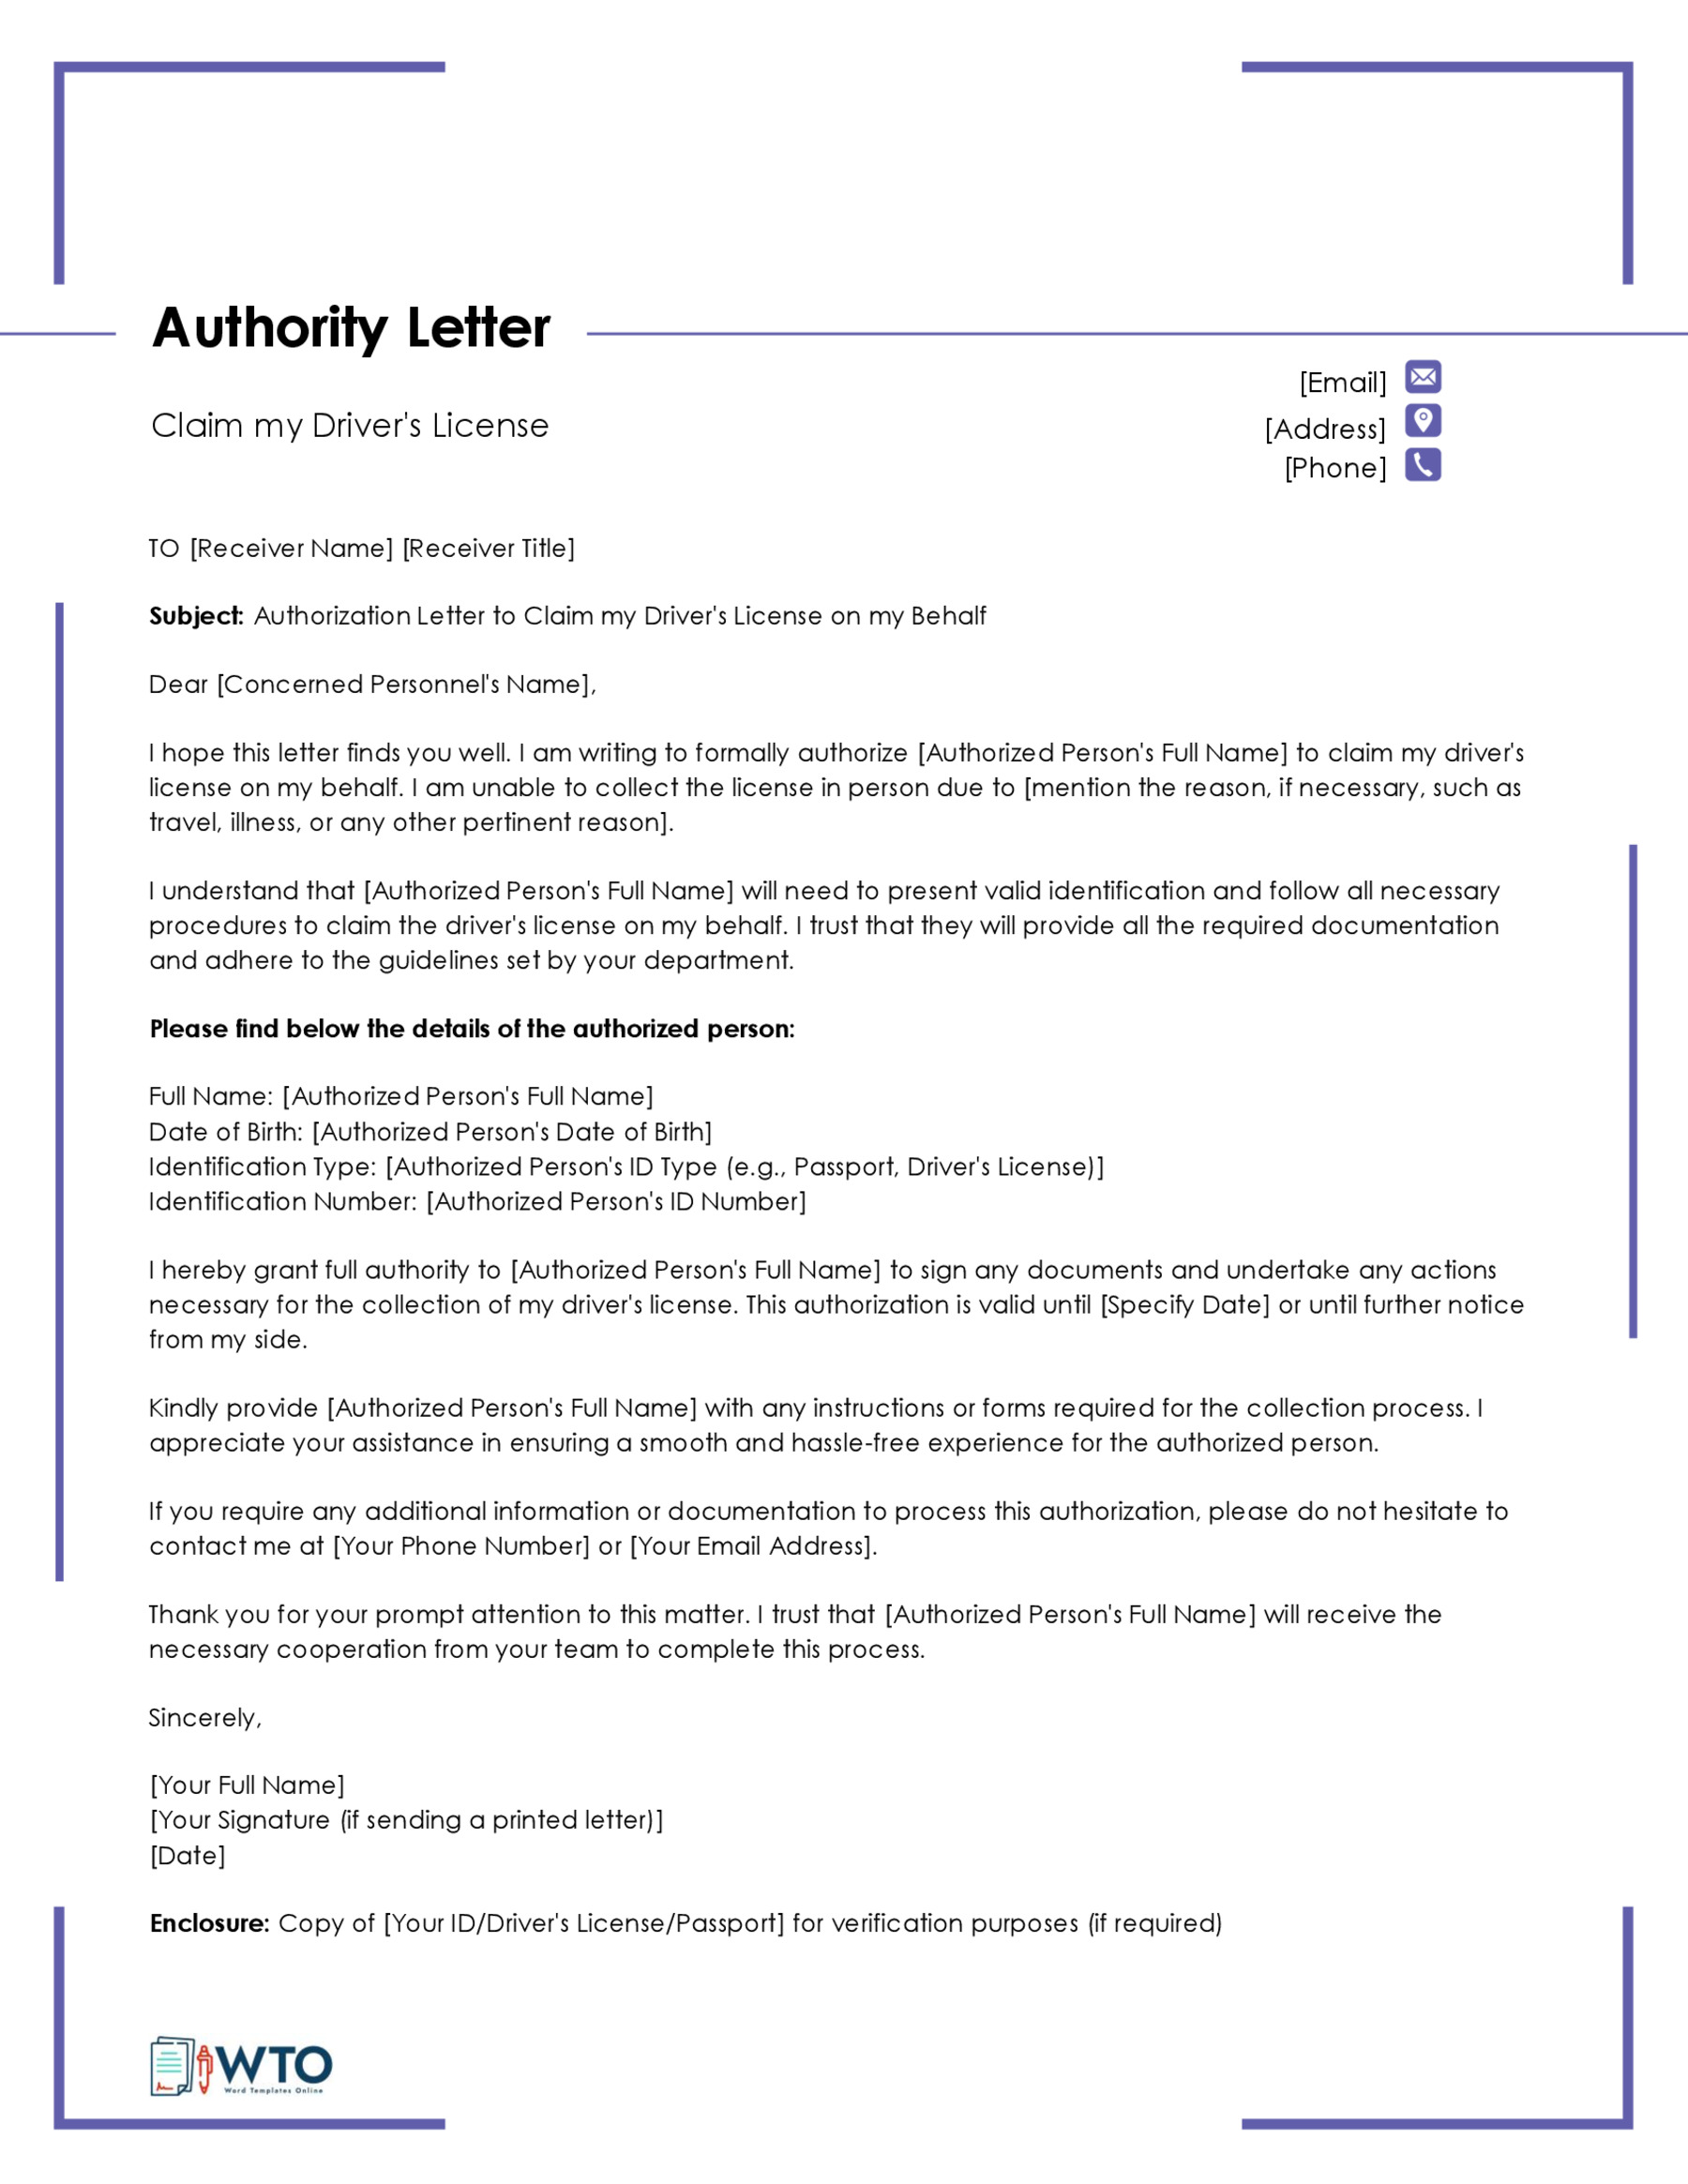 Authorization Letter to Claim Template-Downloadable